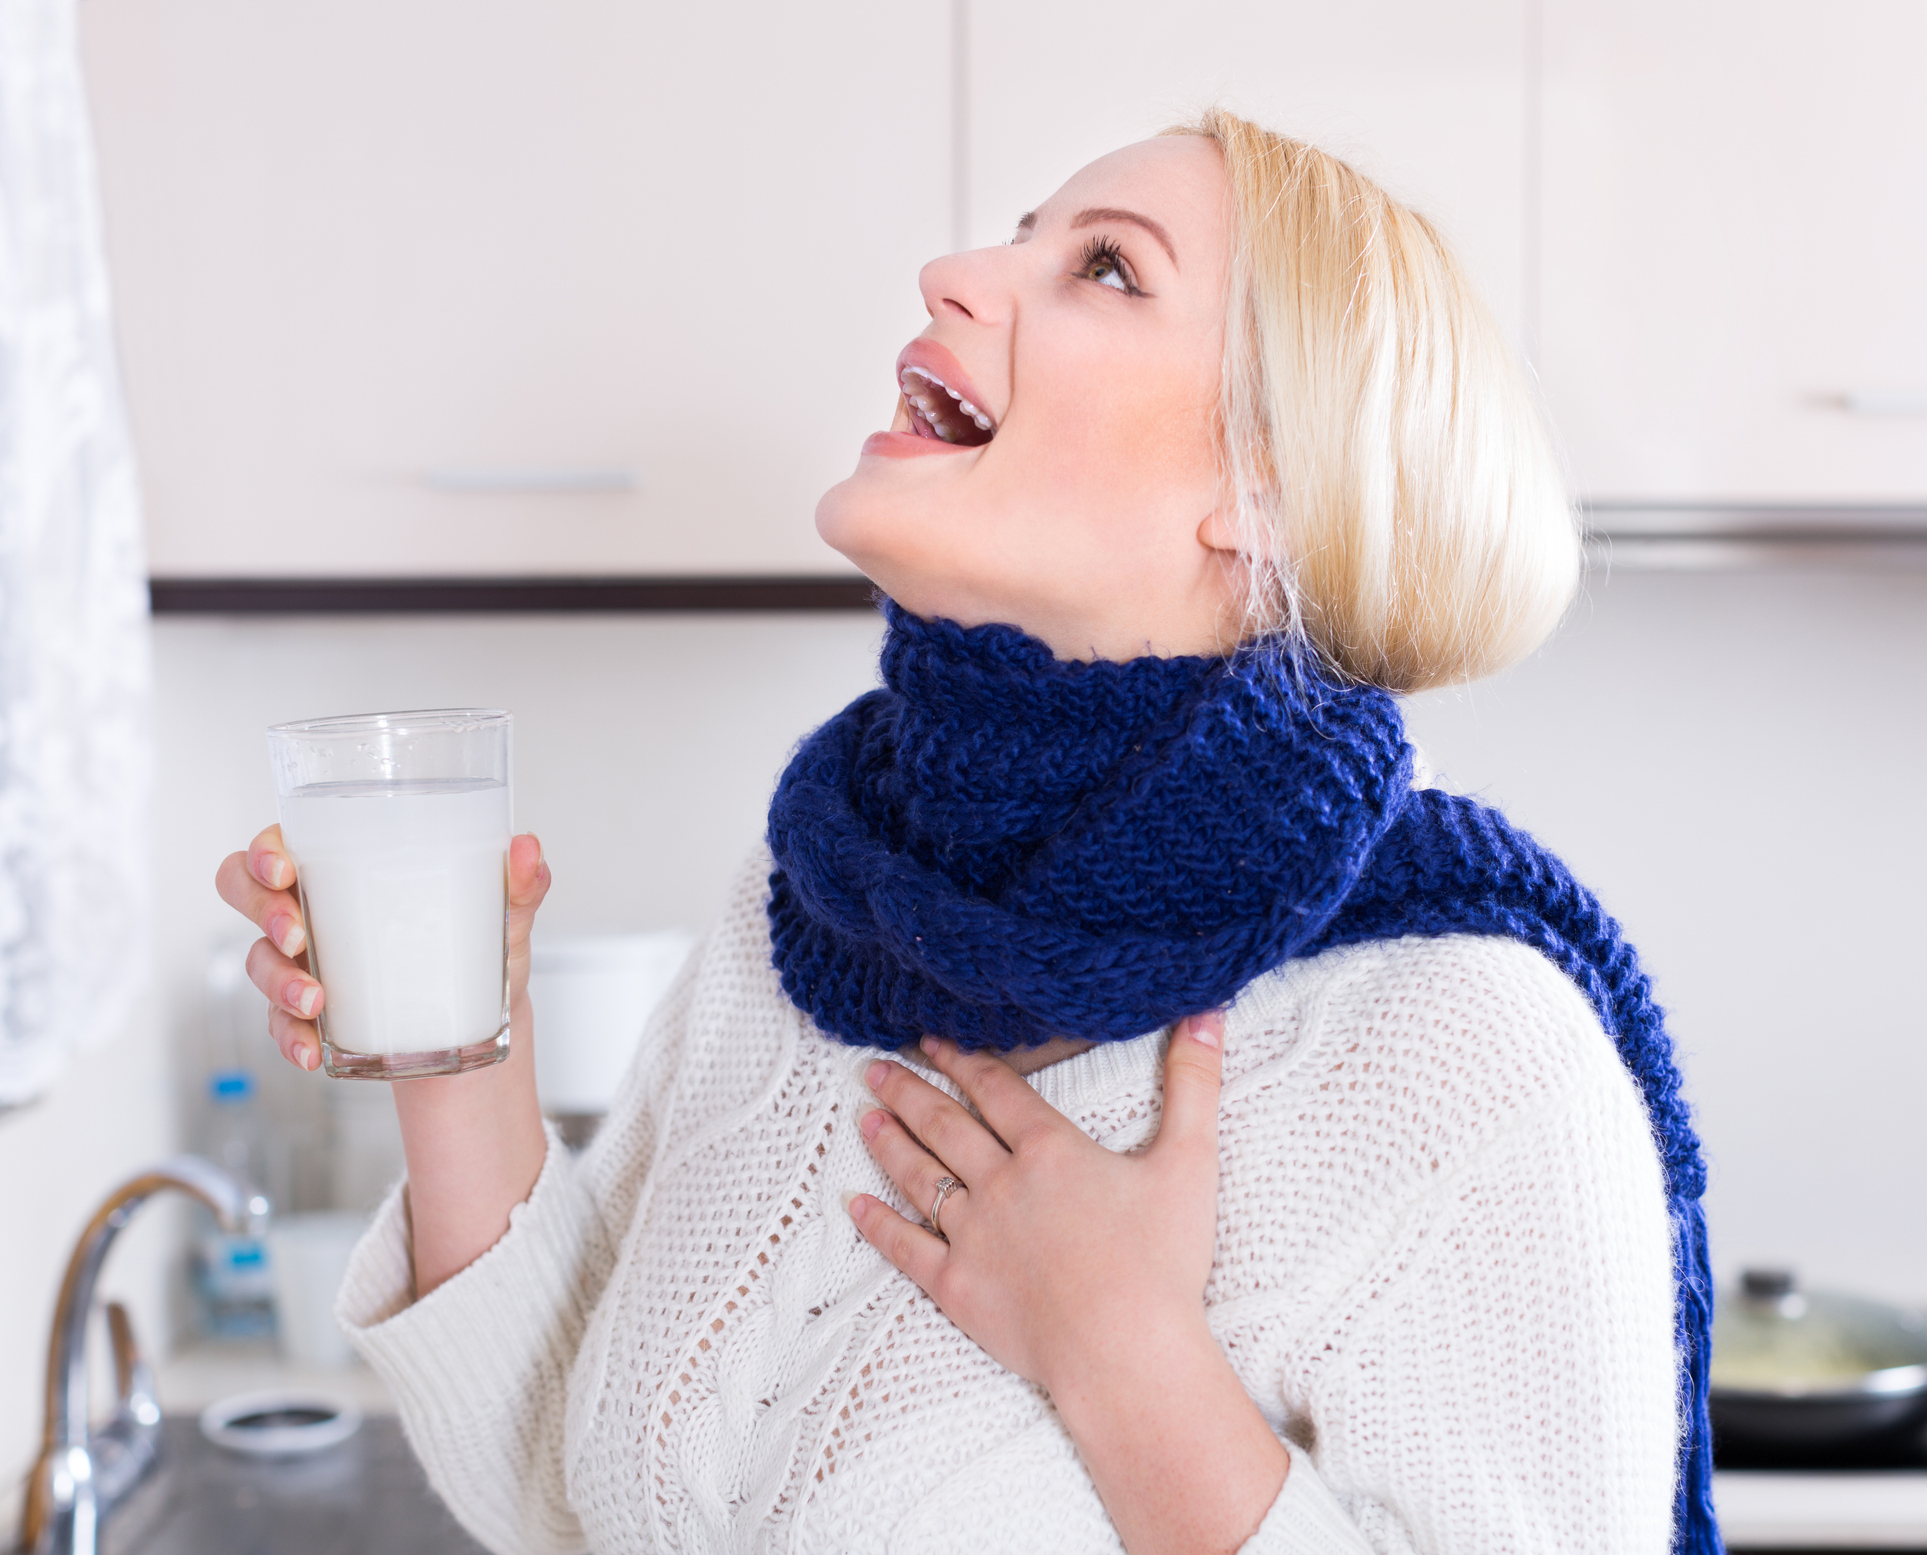 An image of a woman gargling with salt water in front of the kitchen sink.